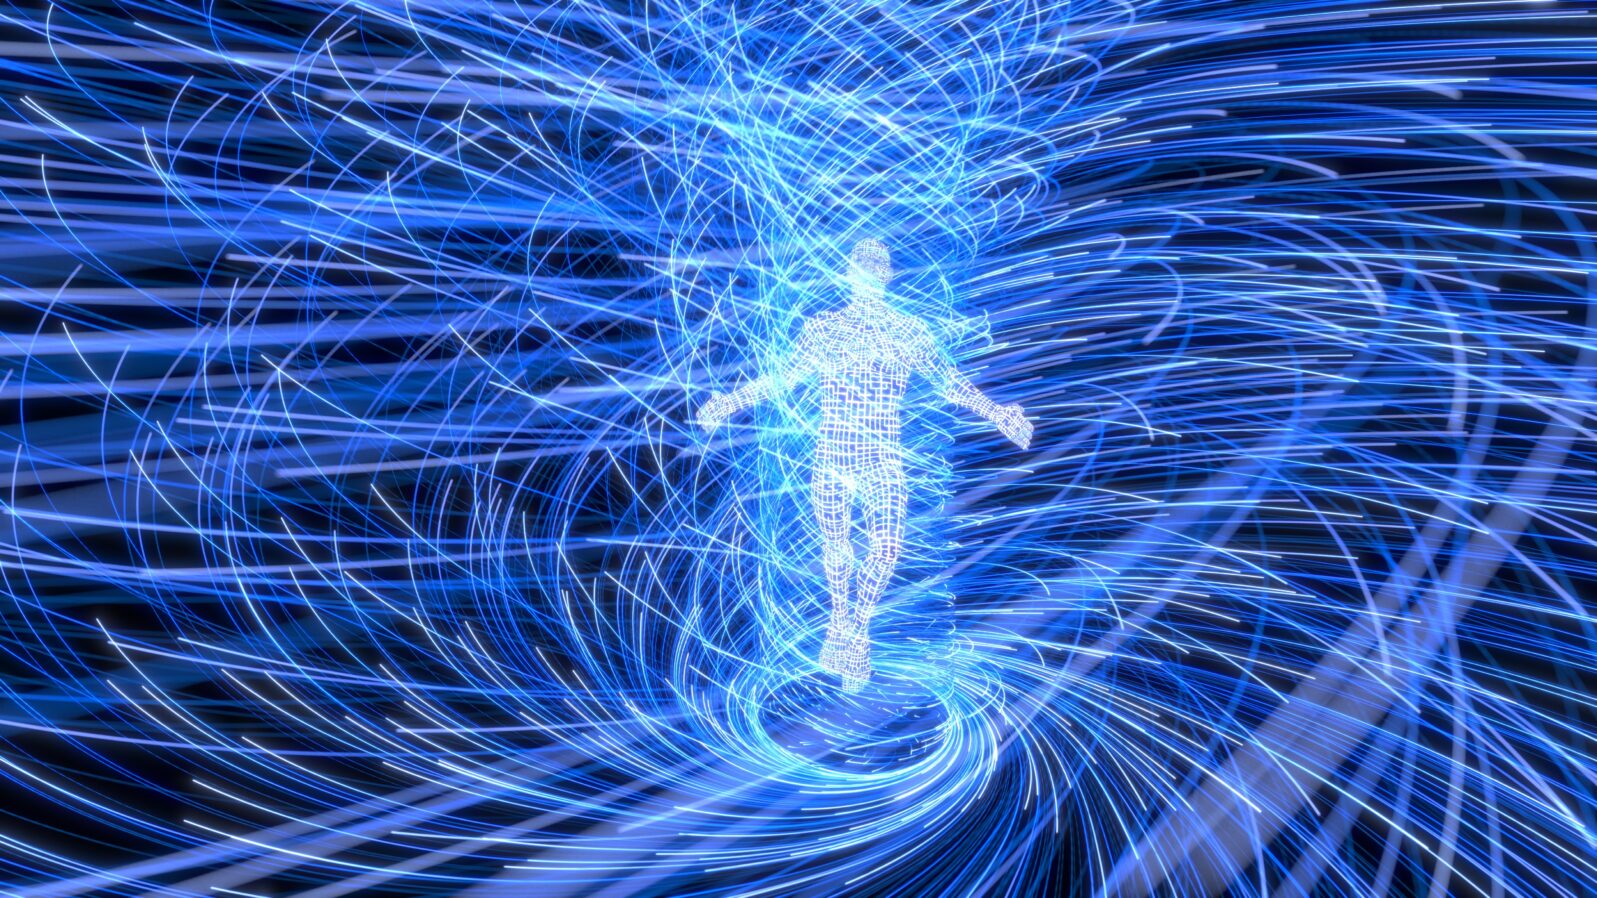 artificial intelligence figure in the center of blue energy vortex. 3d illustration